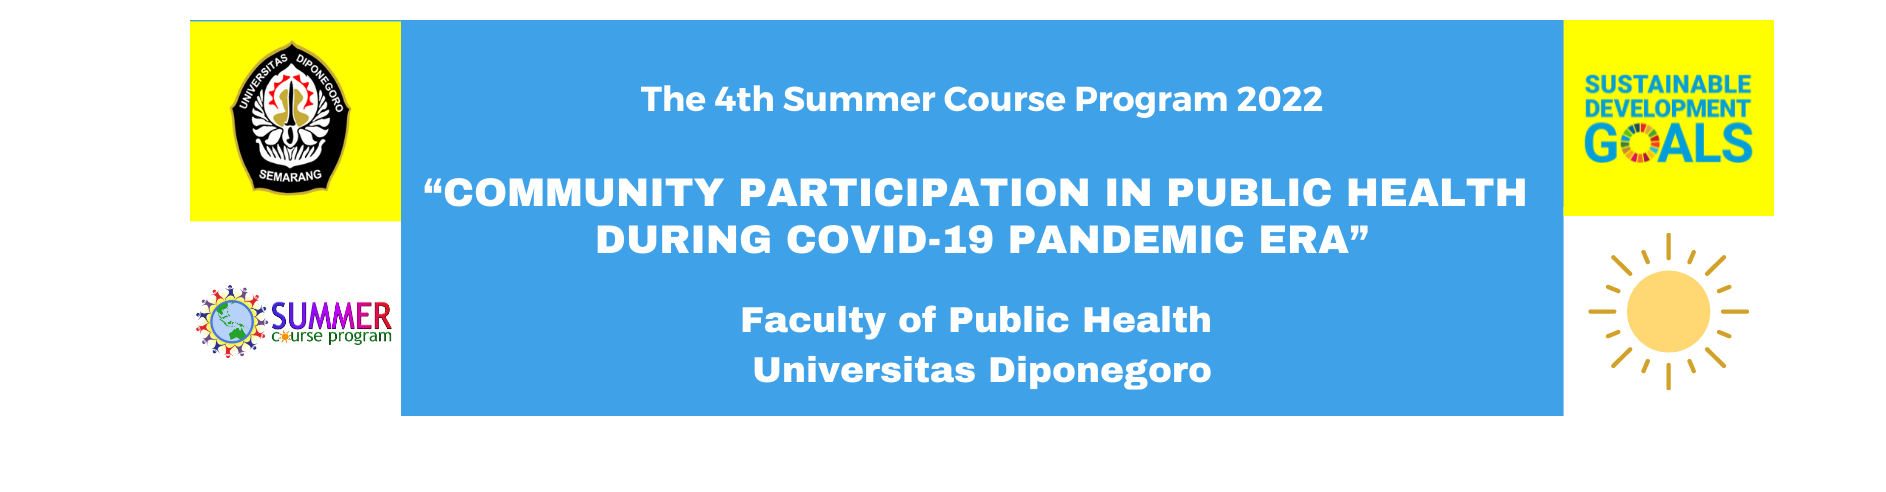 Community Participation in Public Health during Covid-19 Pandemic Era